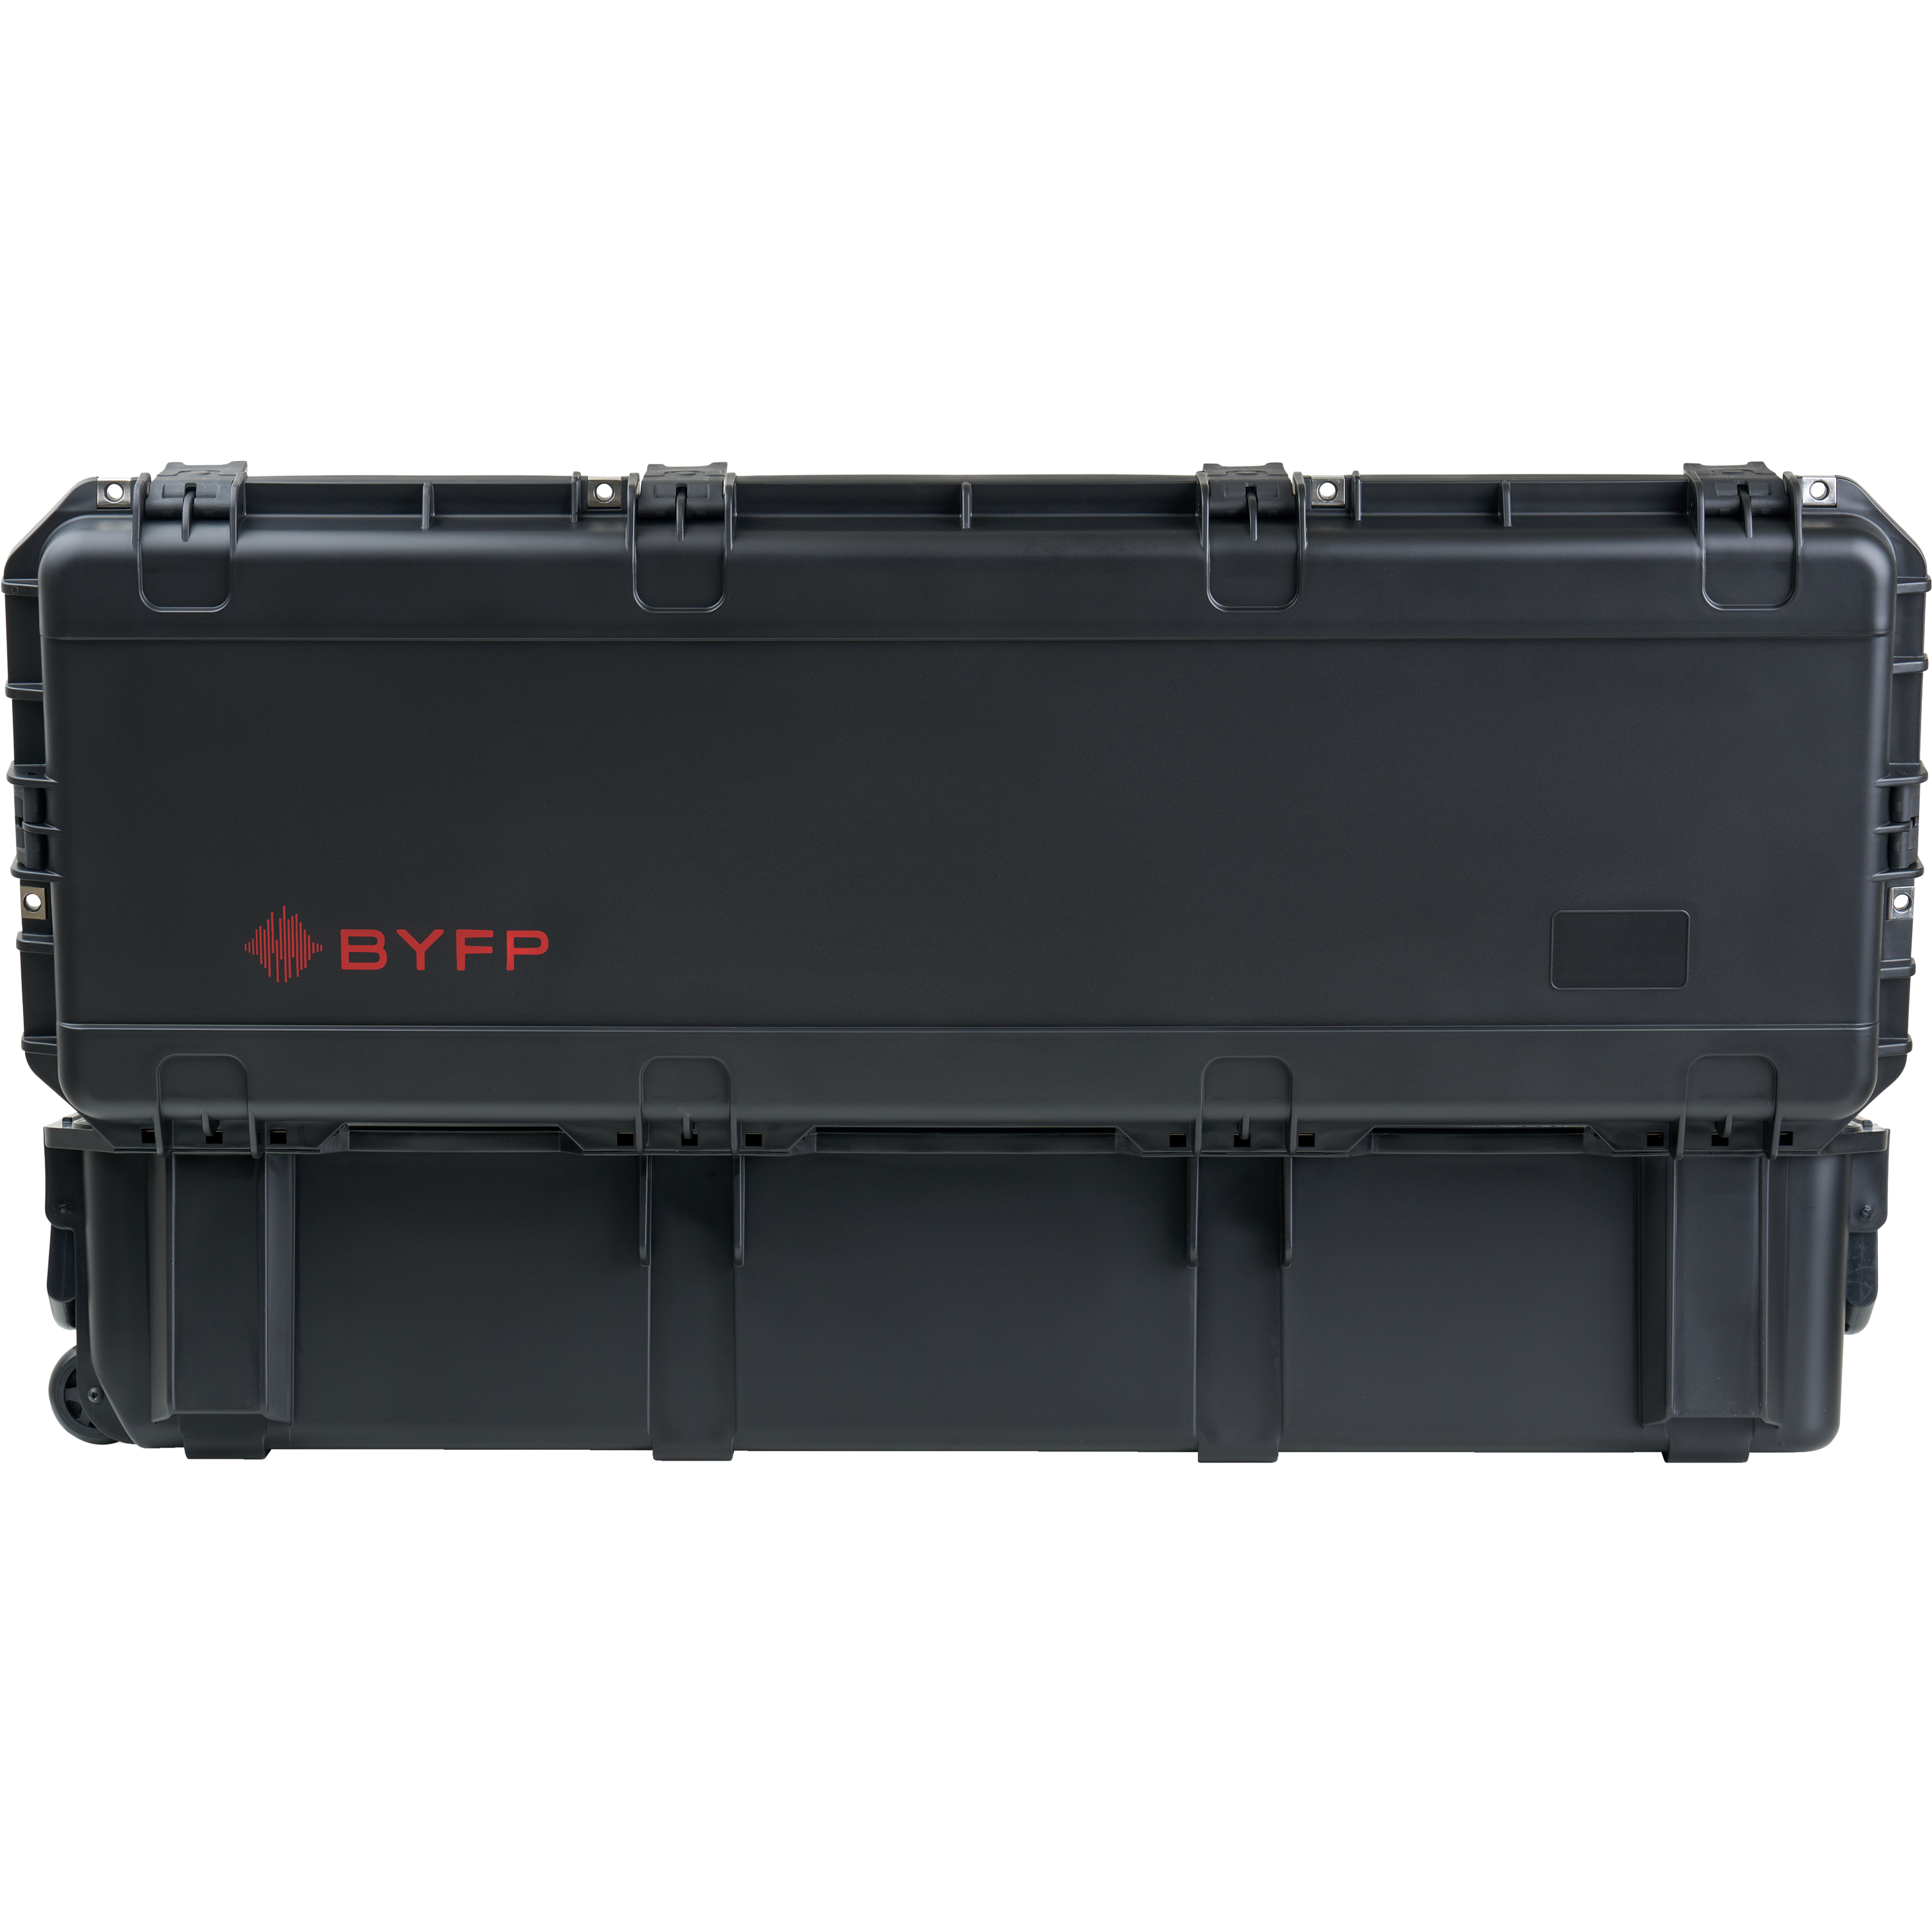 BYFP ipCase for 2x Chauvet Pinspot Bar